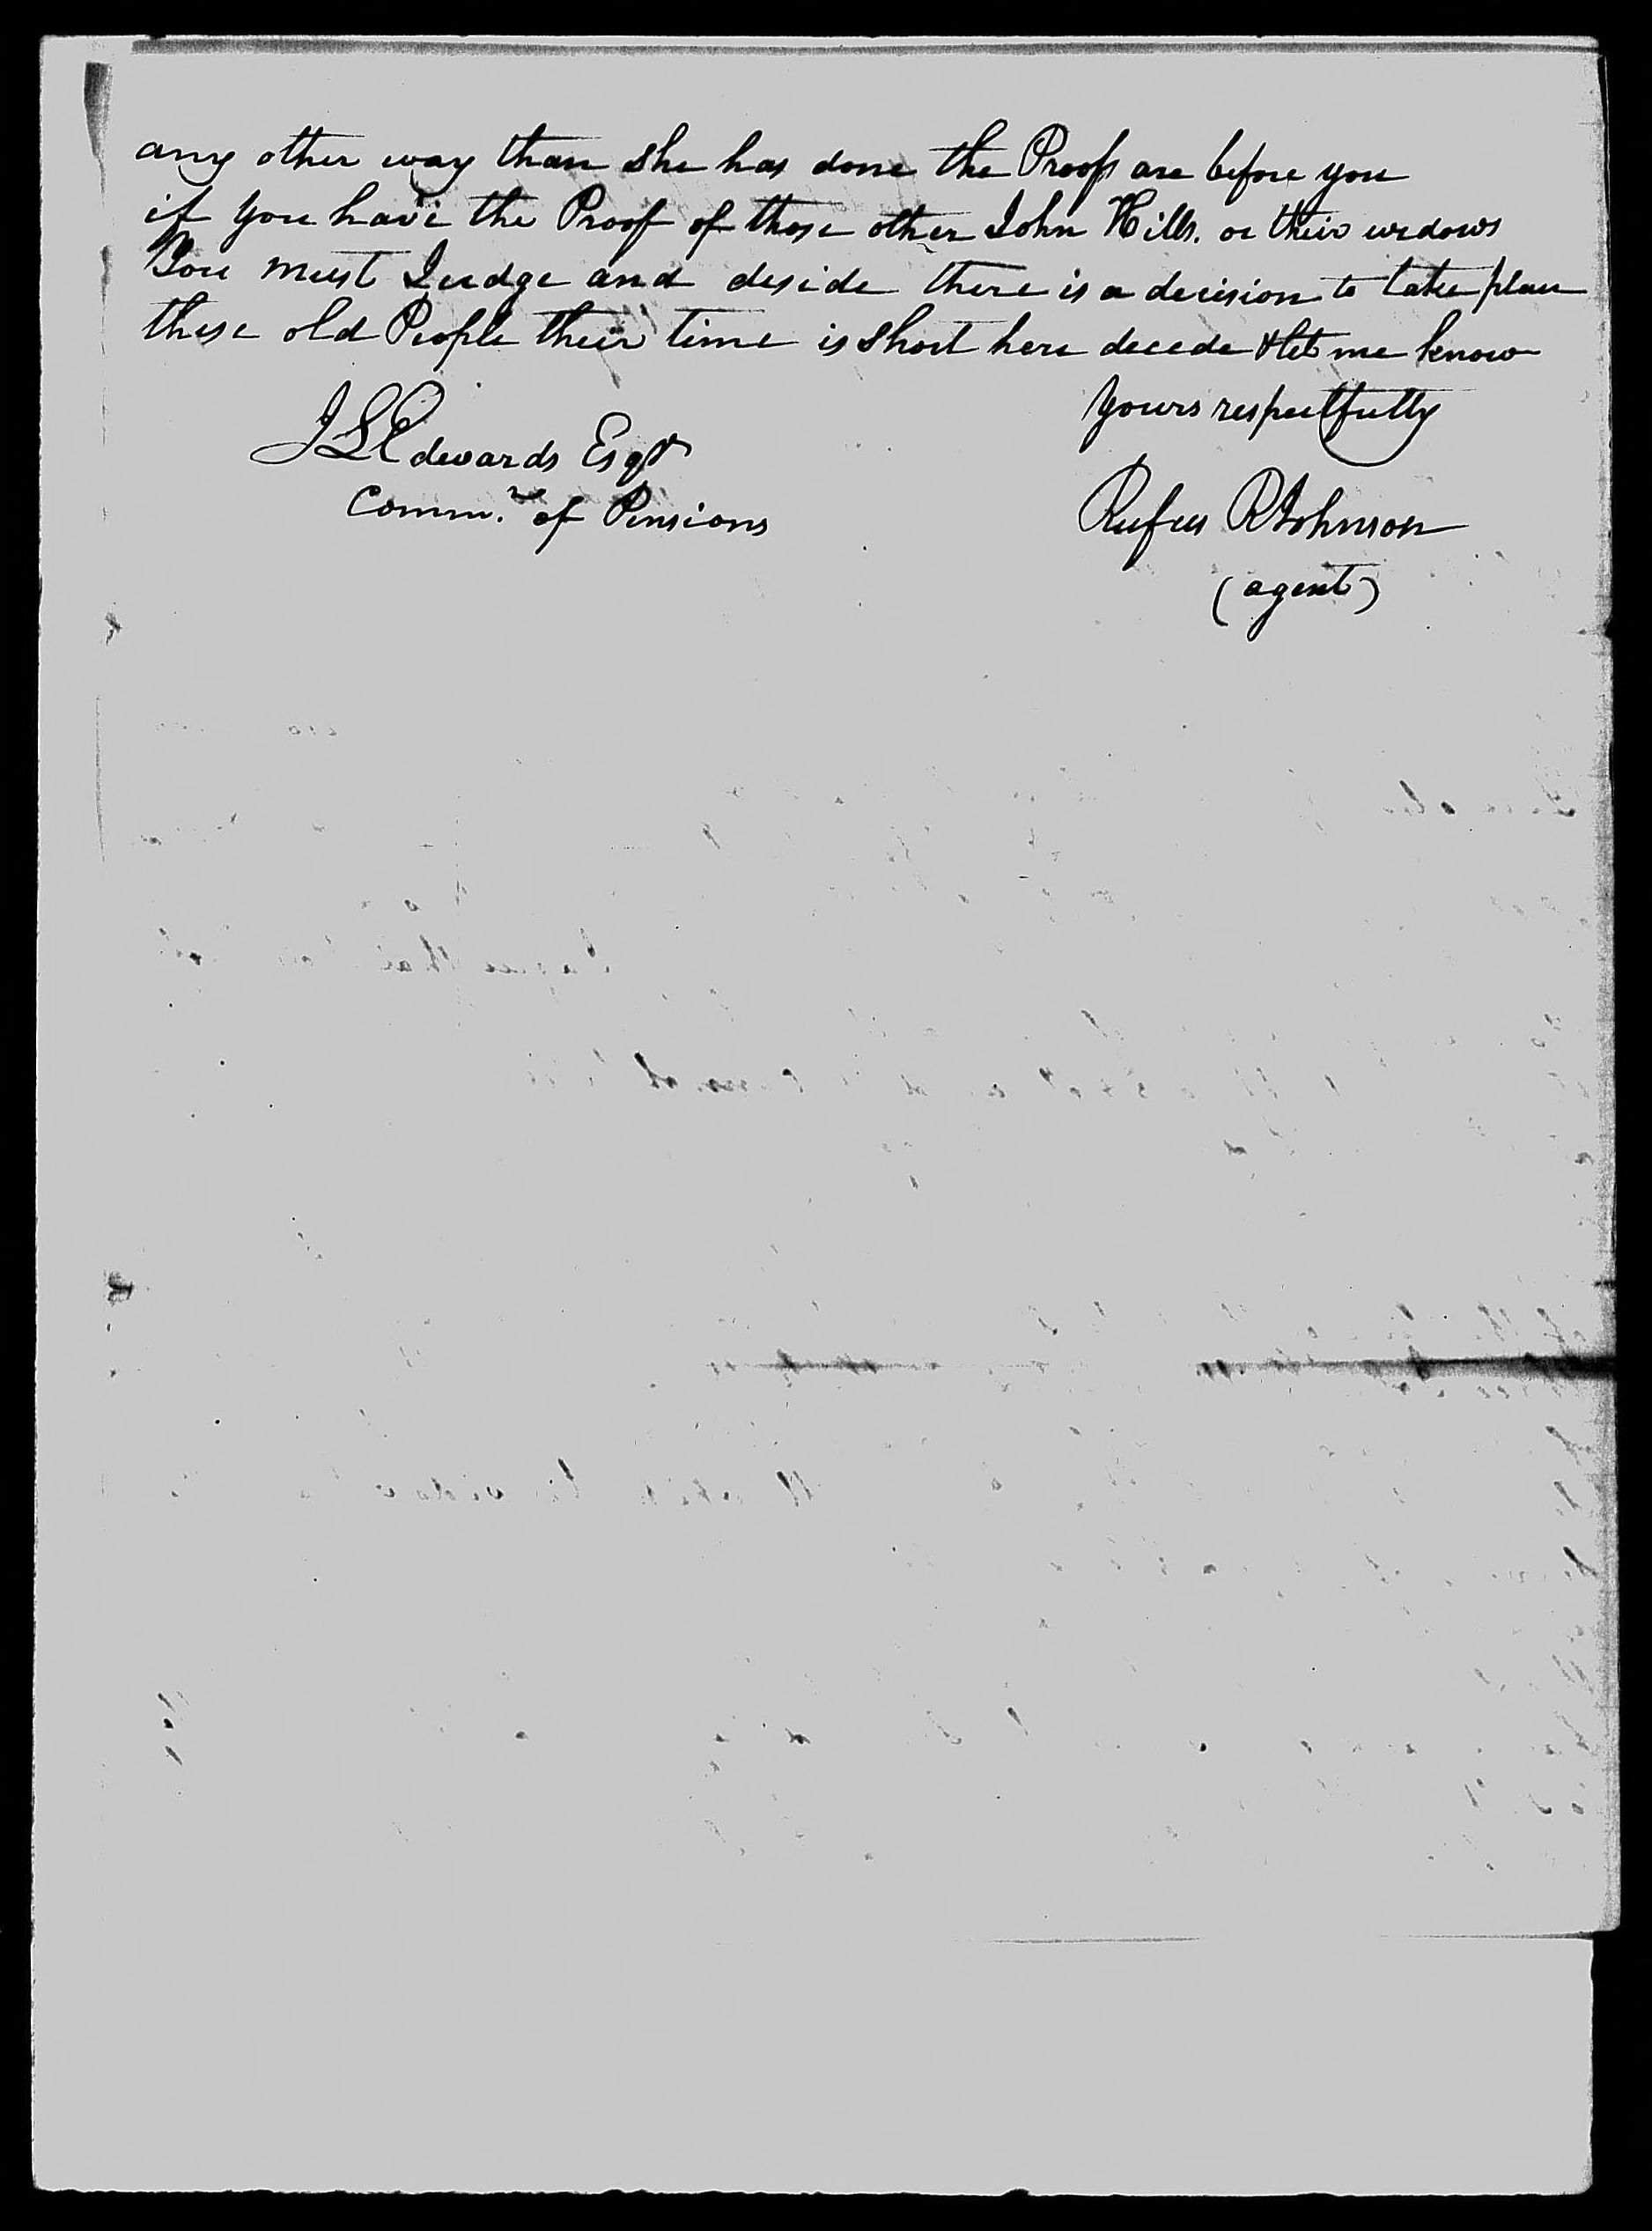 Letter from Rufus R. Johnson to James L. Edwards, 24 September 1838, page 2